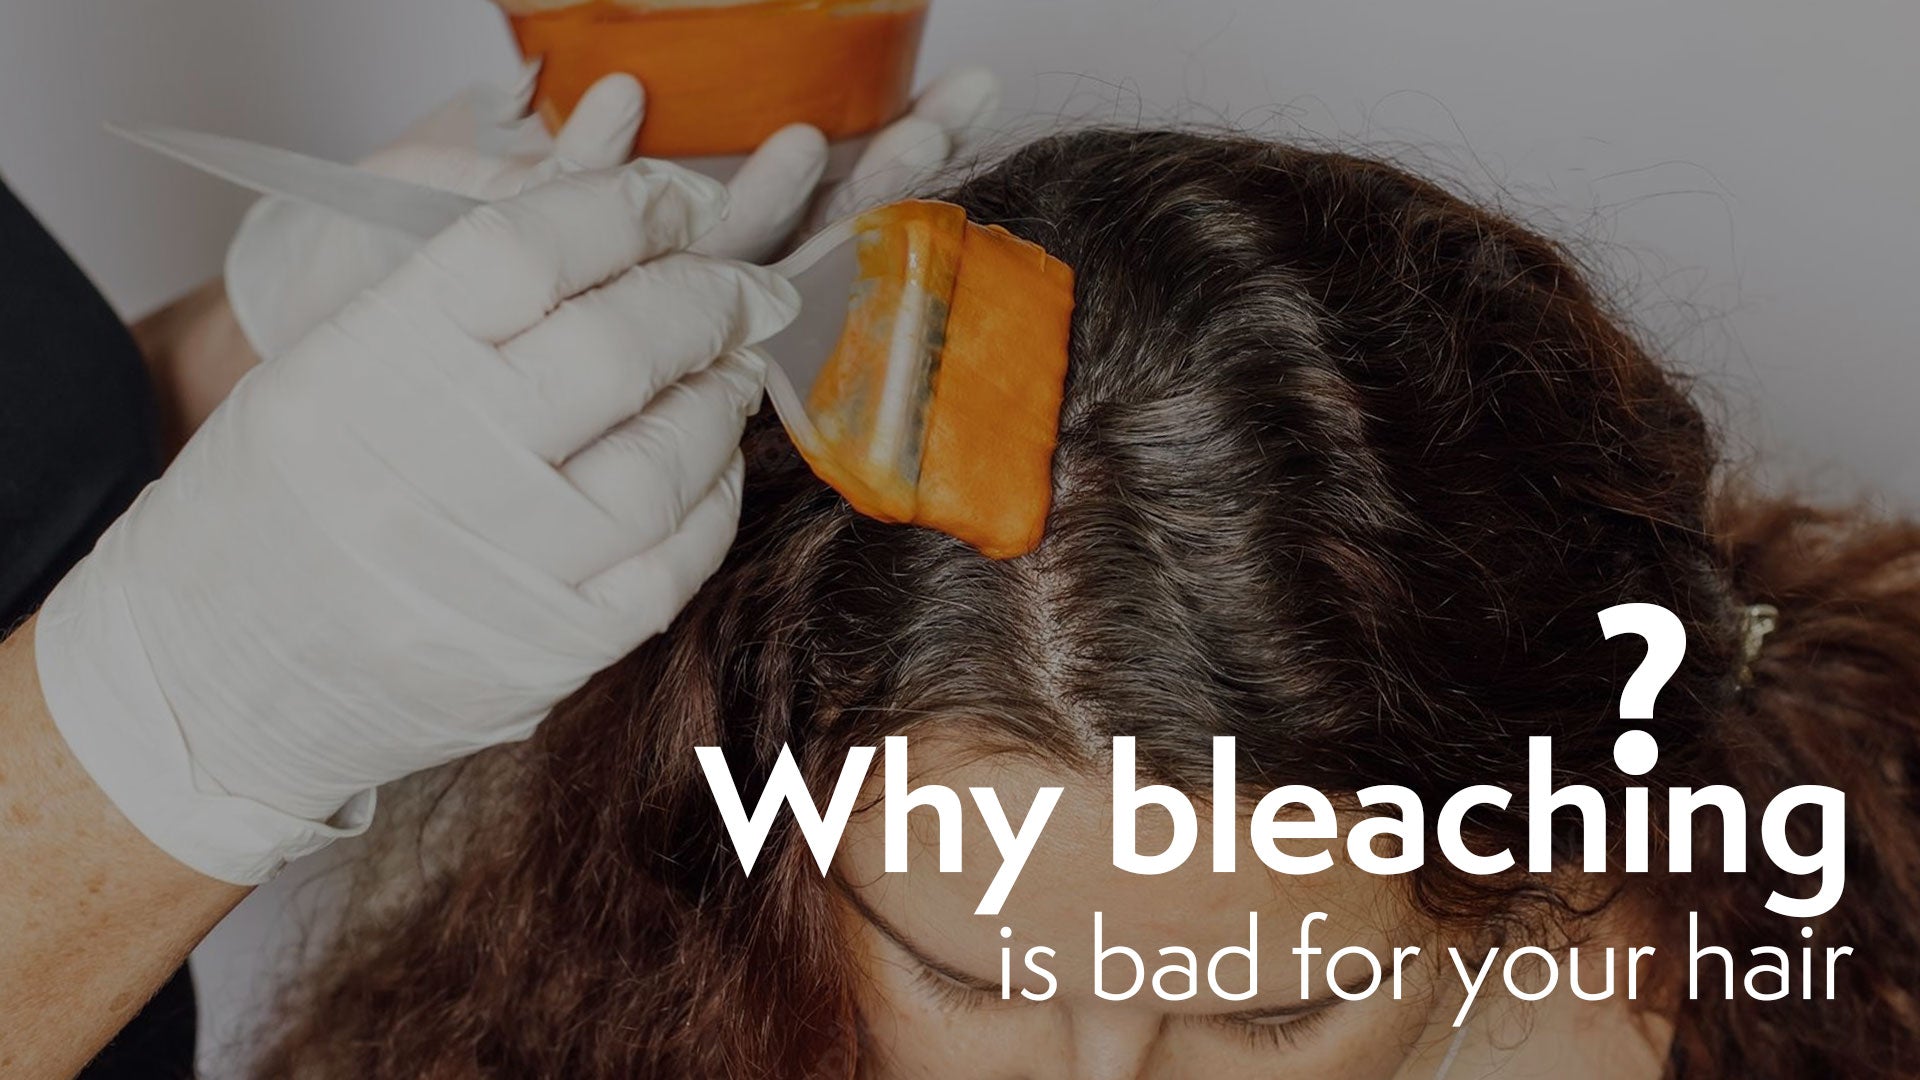 Why bleaching is bad for your hair?